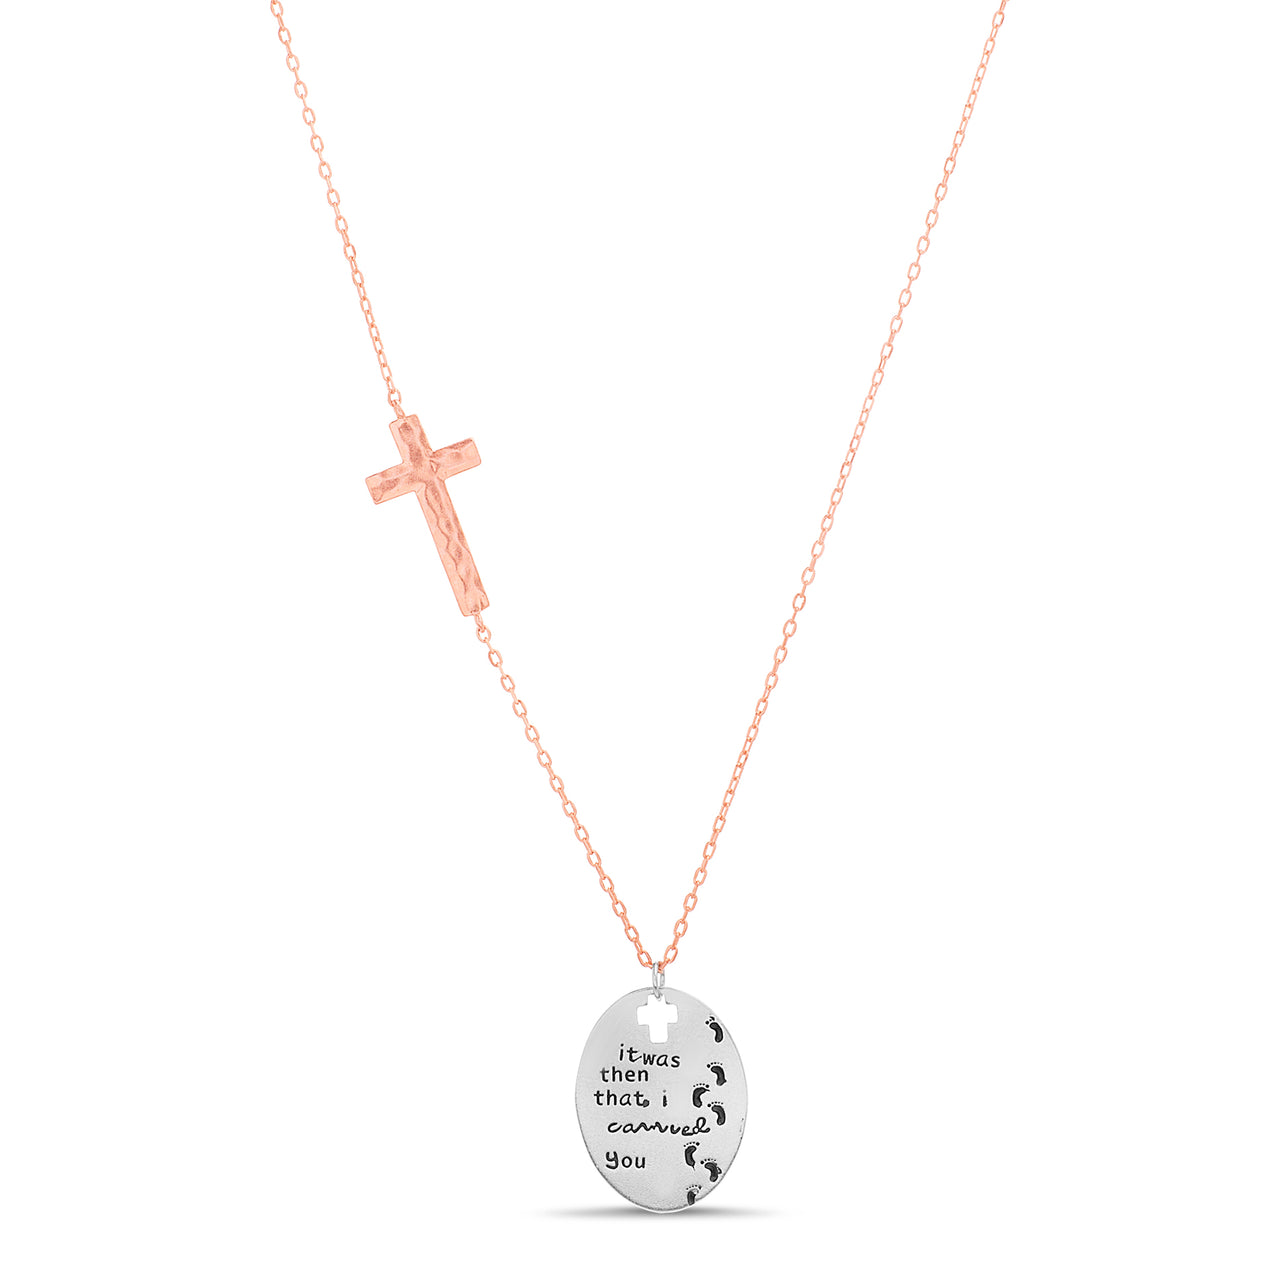 My Bible Two-tone Plated Sterling Silver Hammered Footprint Pendant Station Cross Necklace